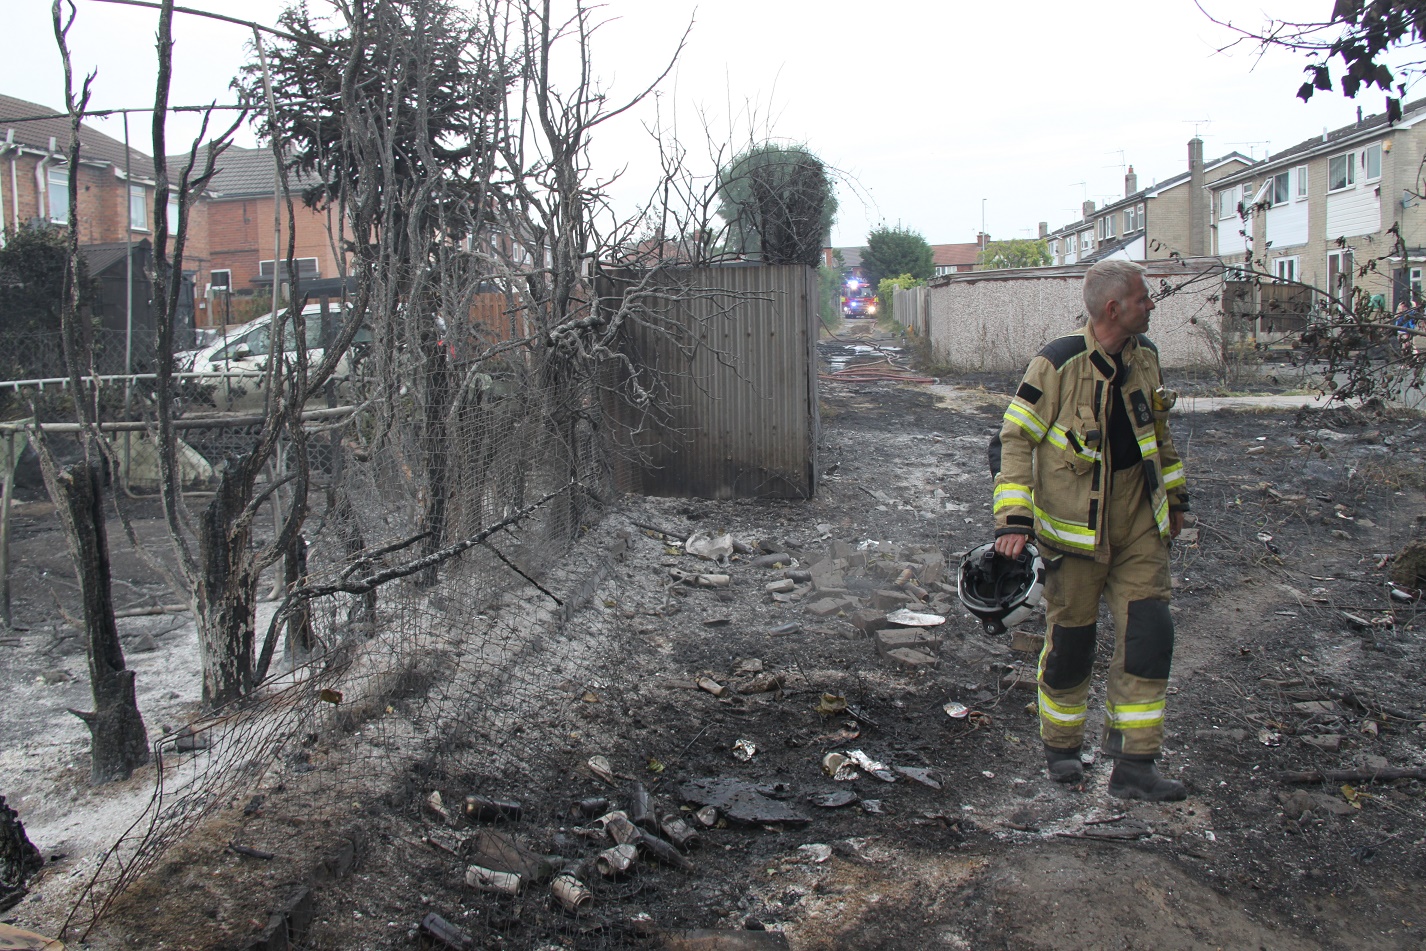 A firefighter in a housing estate in South Yorkshire